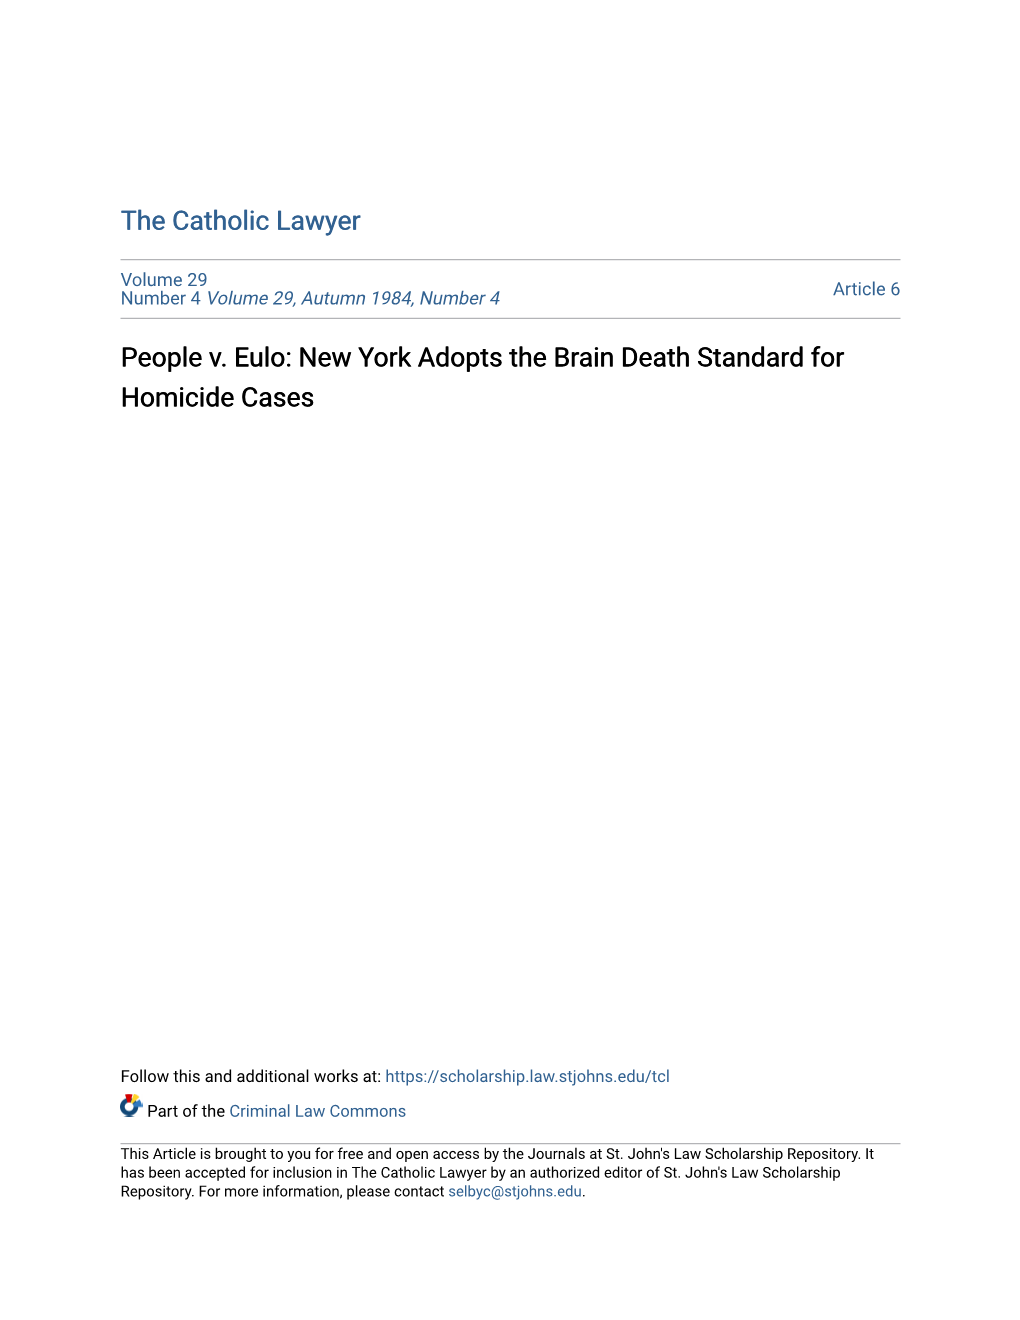 People V. Eulo: New York Adopts the Brain Death Standard for Homicide Cases